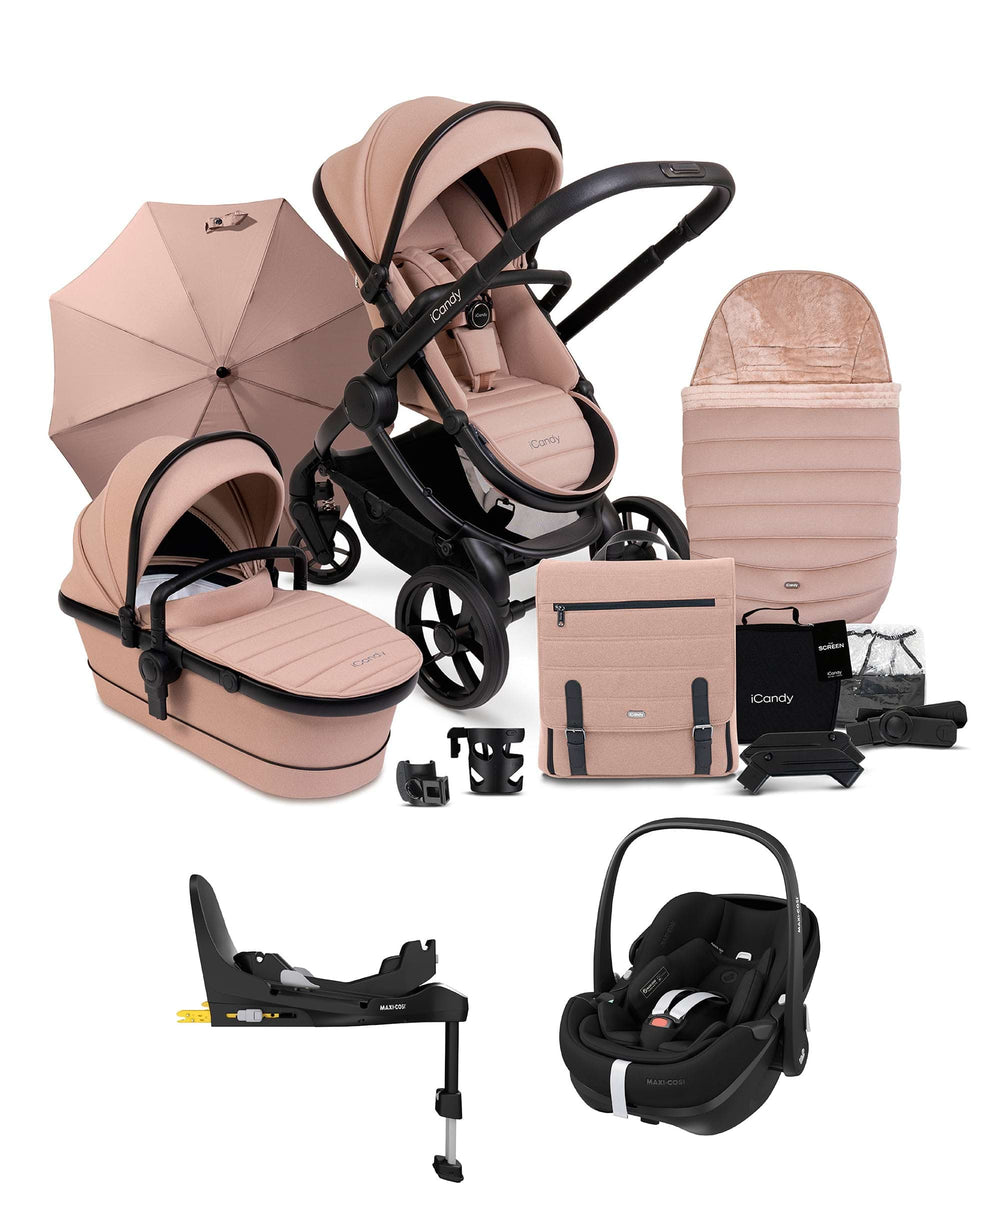 iCandy Pushchairs iCandy Peach 7 Summer Bundle with Maxi-Cosi Pebble 360 Pro Car Seat & FamilyFix 360 Base in Cookie